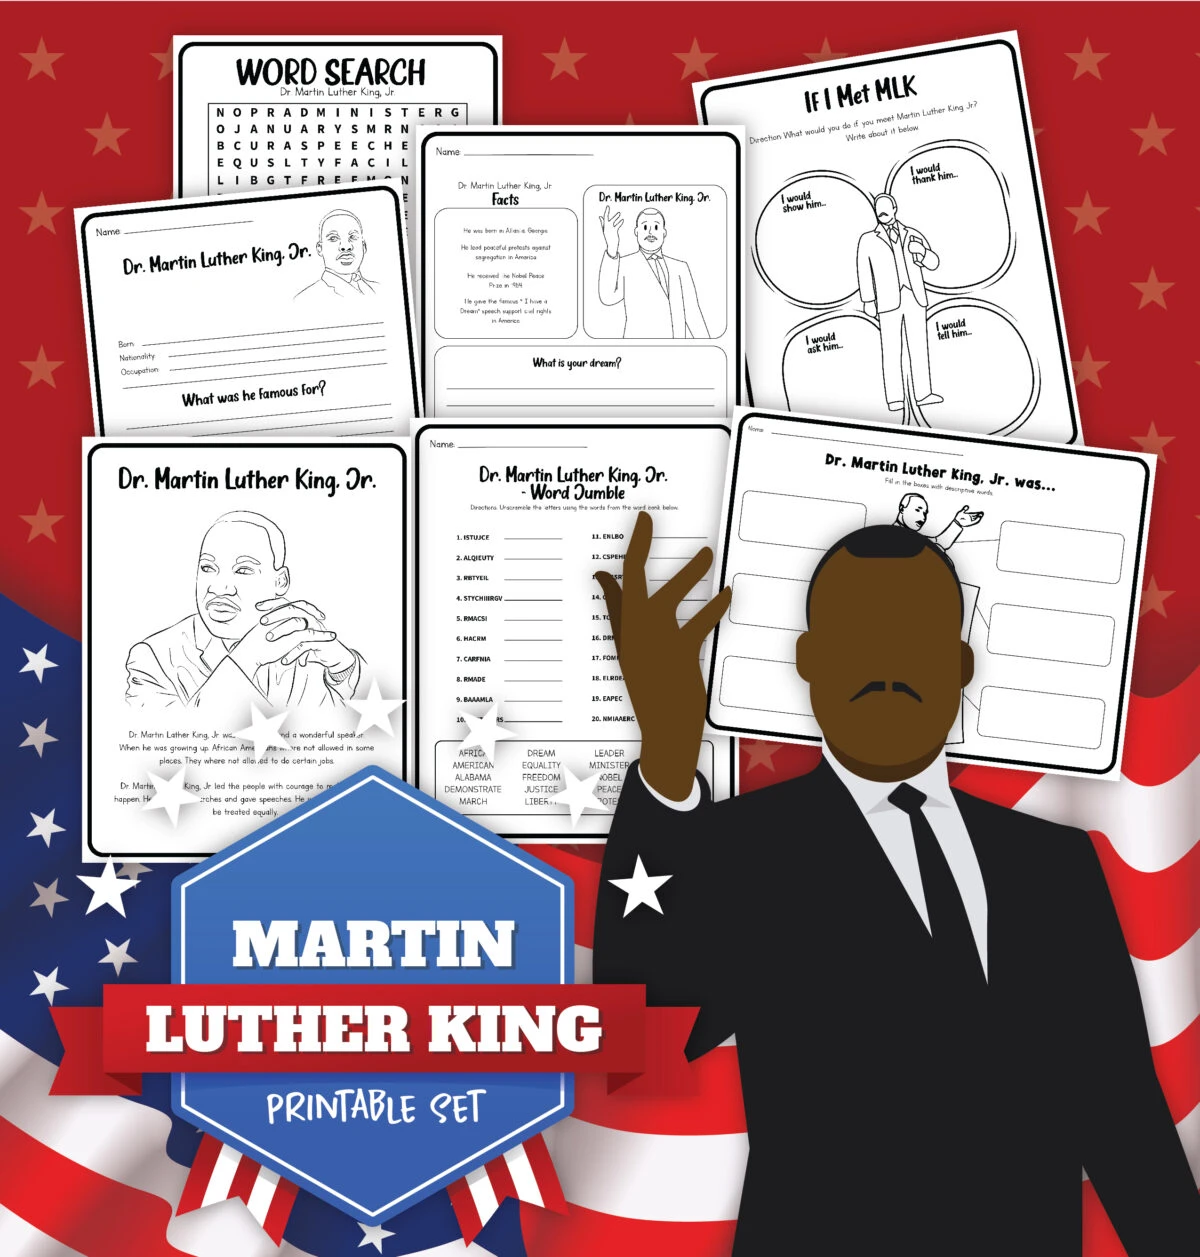 Celebrate the legacy of Martin Luther King, Jr. with these free worksheets for kids! Includes word searches, writing prompts, and more.